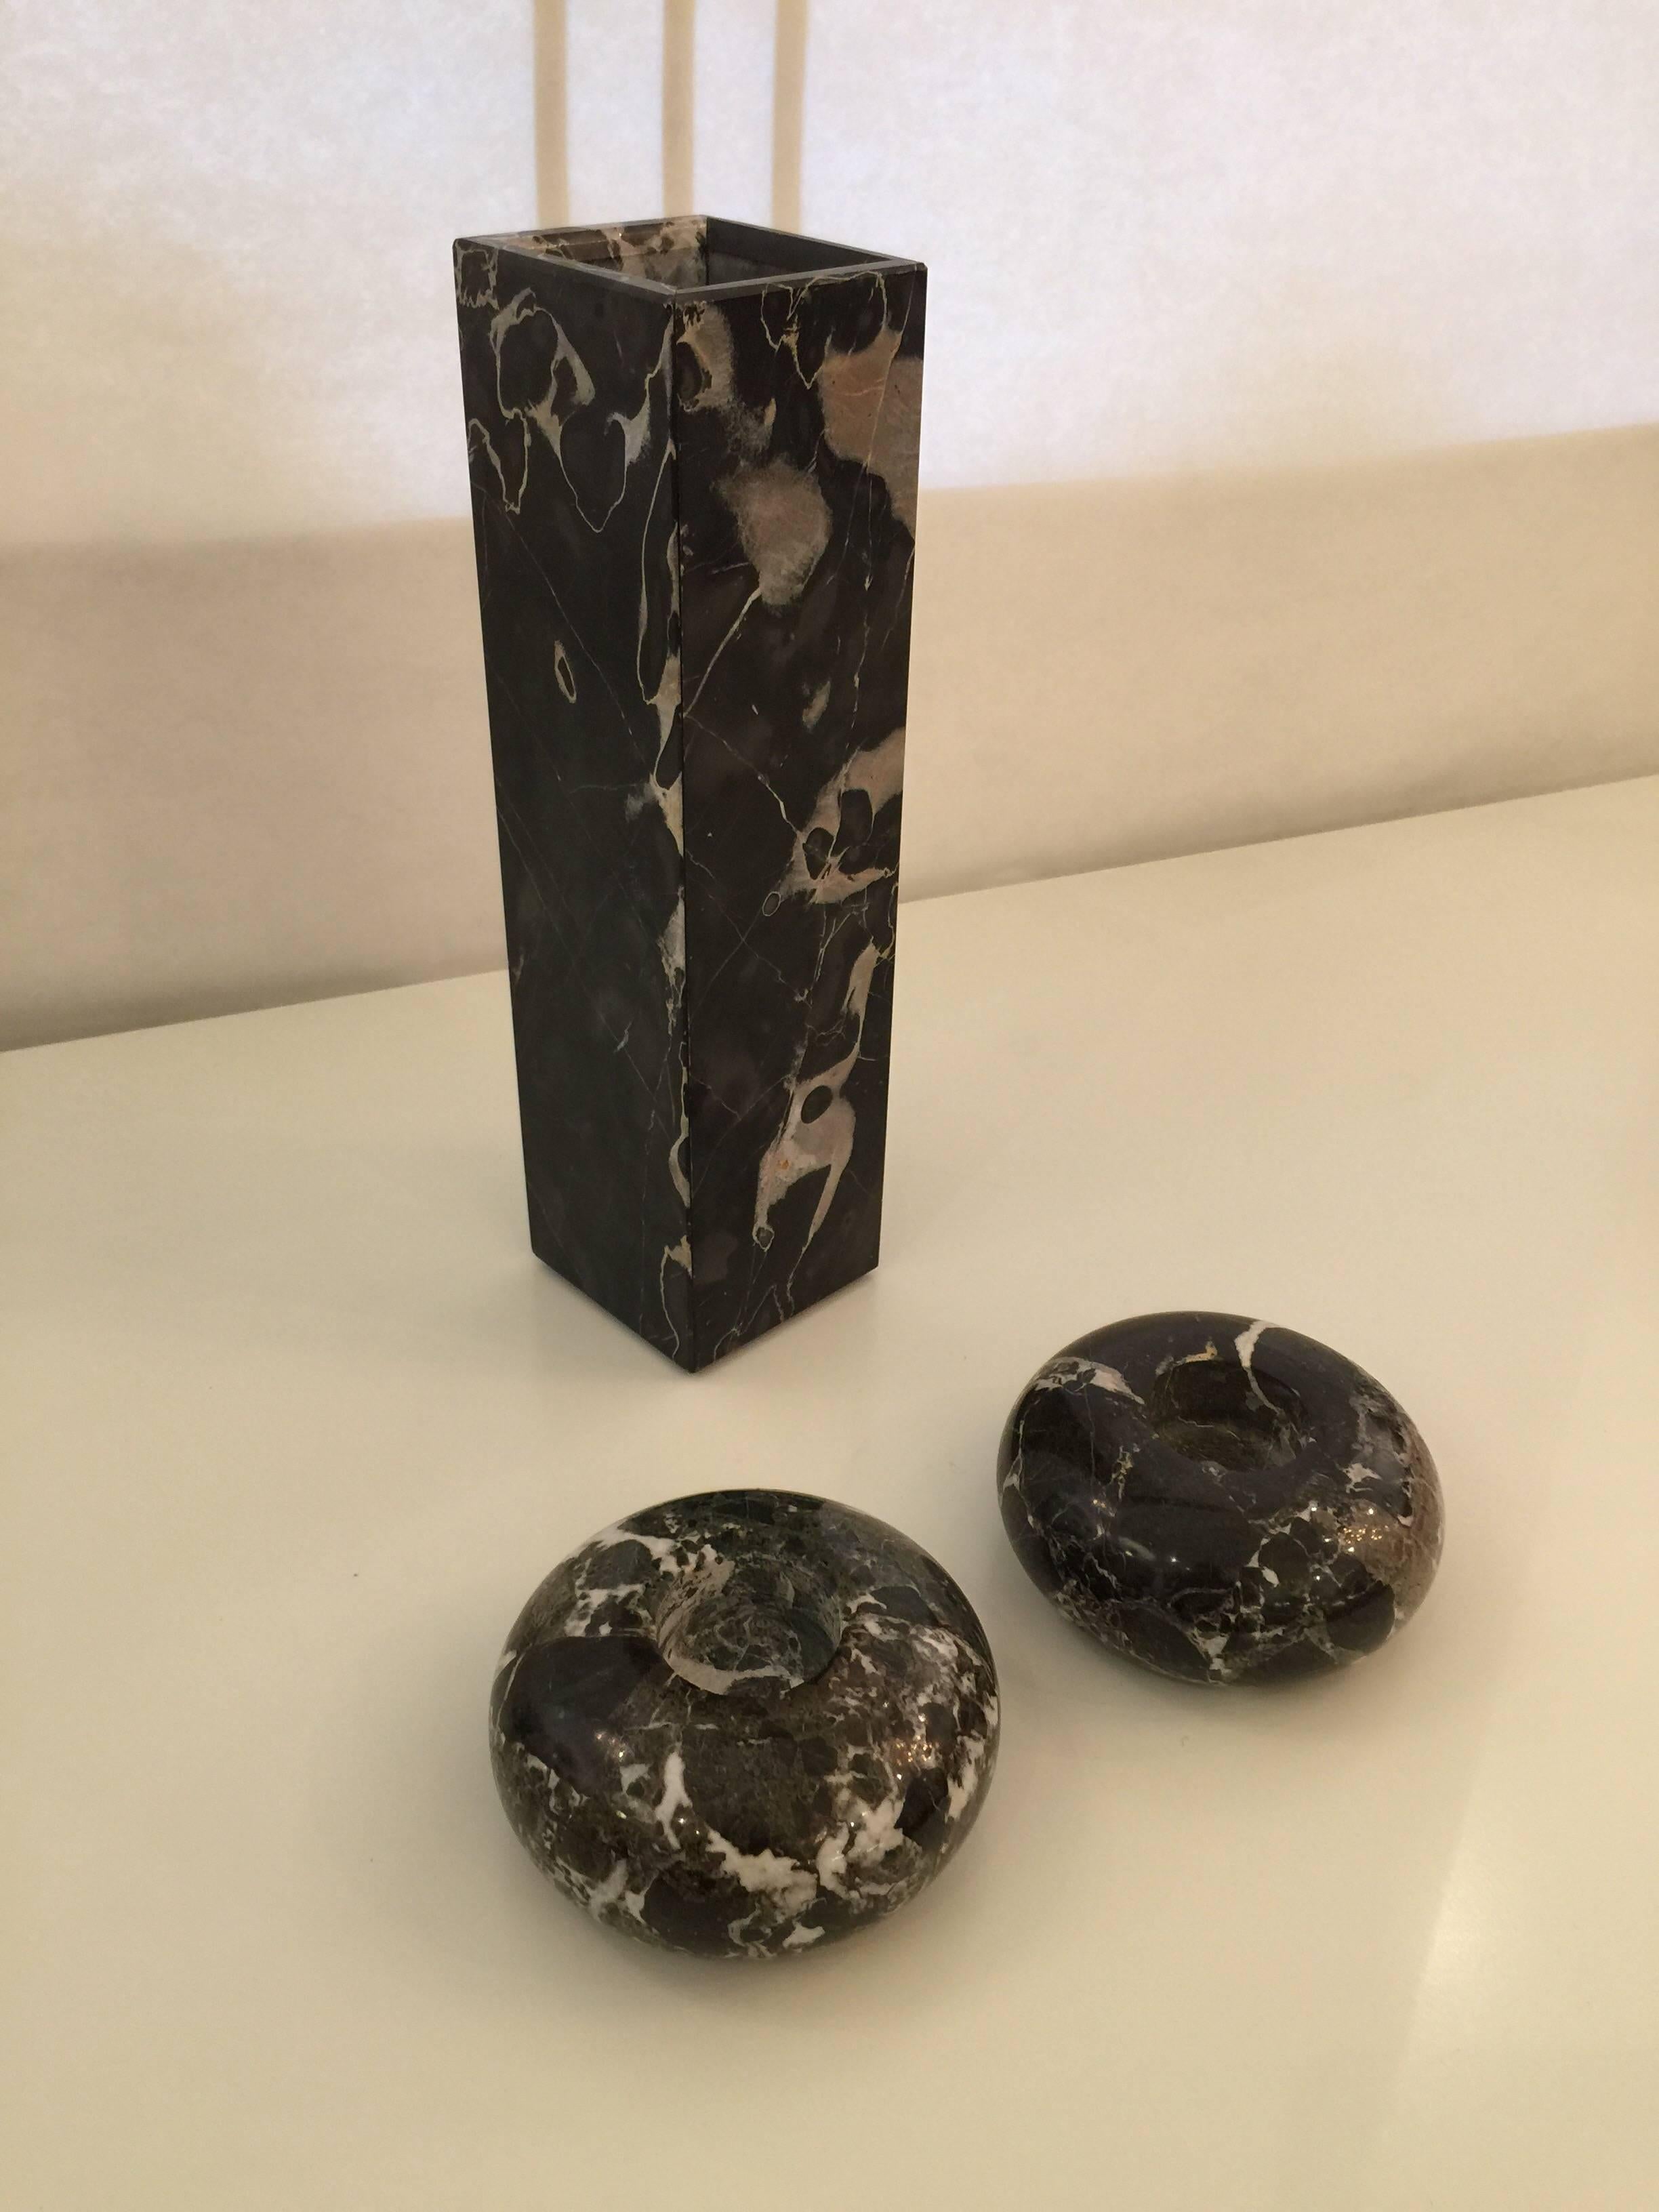 This set of three Italian Nero Marquita marble items are in the style of Sergio Asti or Mangiarotti. Beautiful and simple design, these geometric shapes in rich black Italian marble are perfect for minimal decor.

Dimensions of vase are 11 3/4